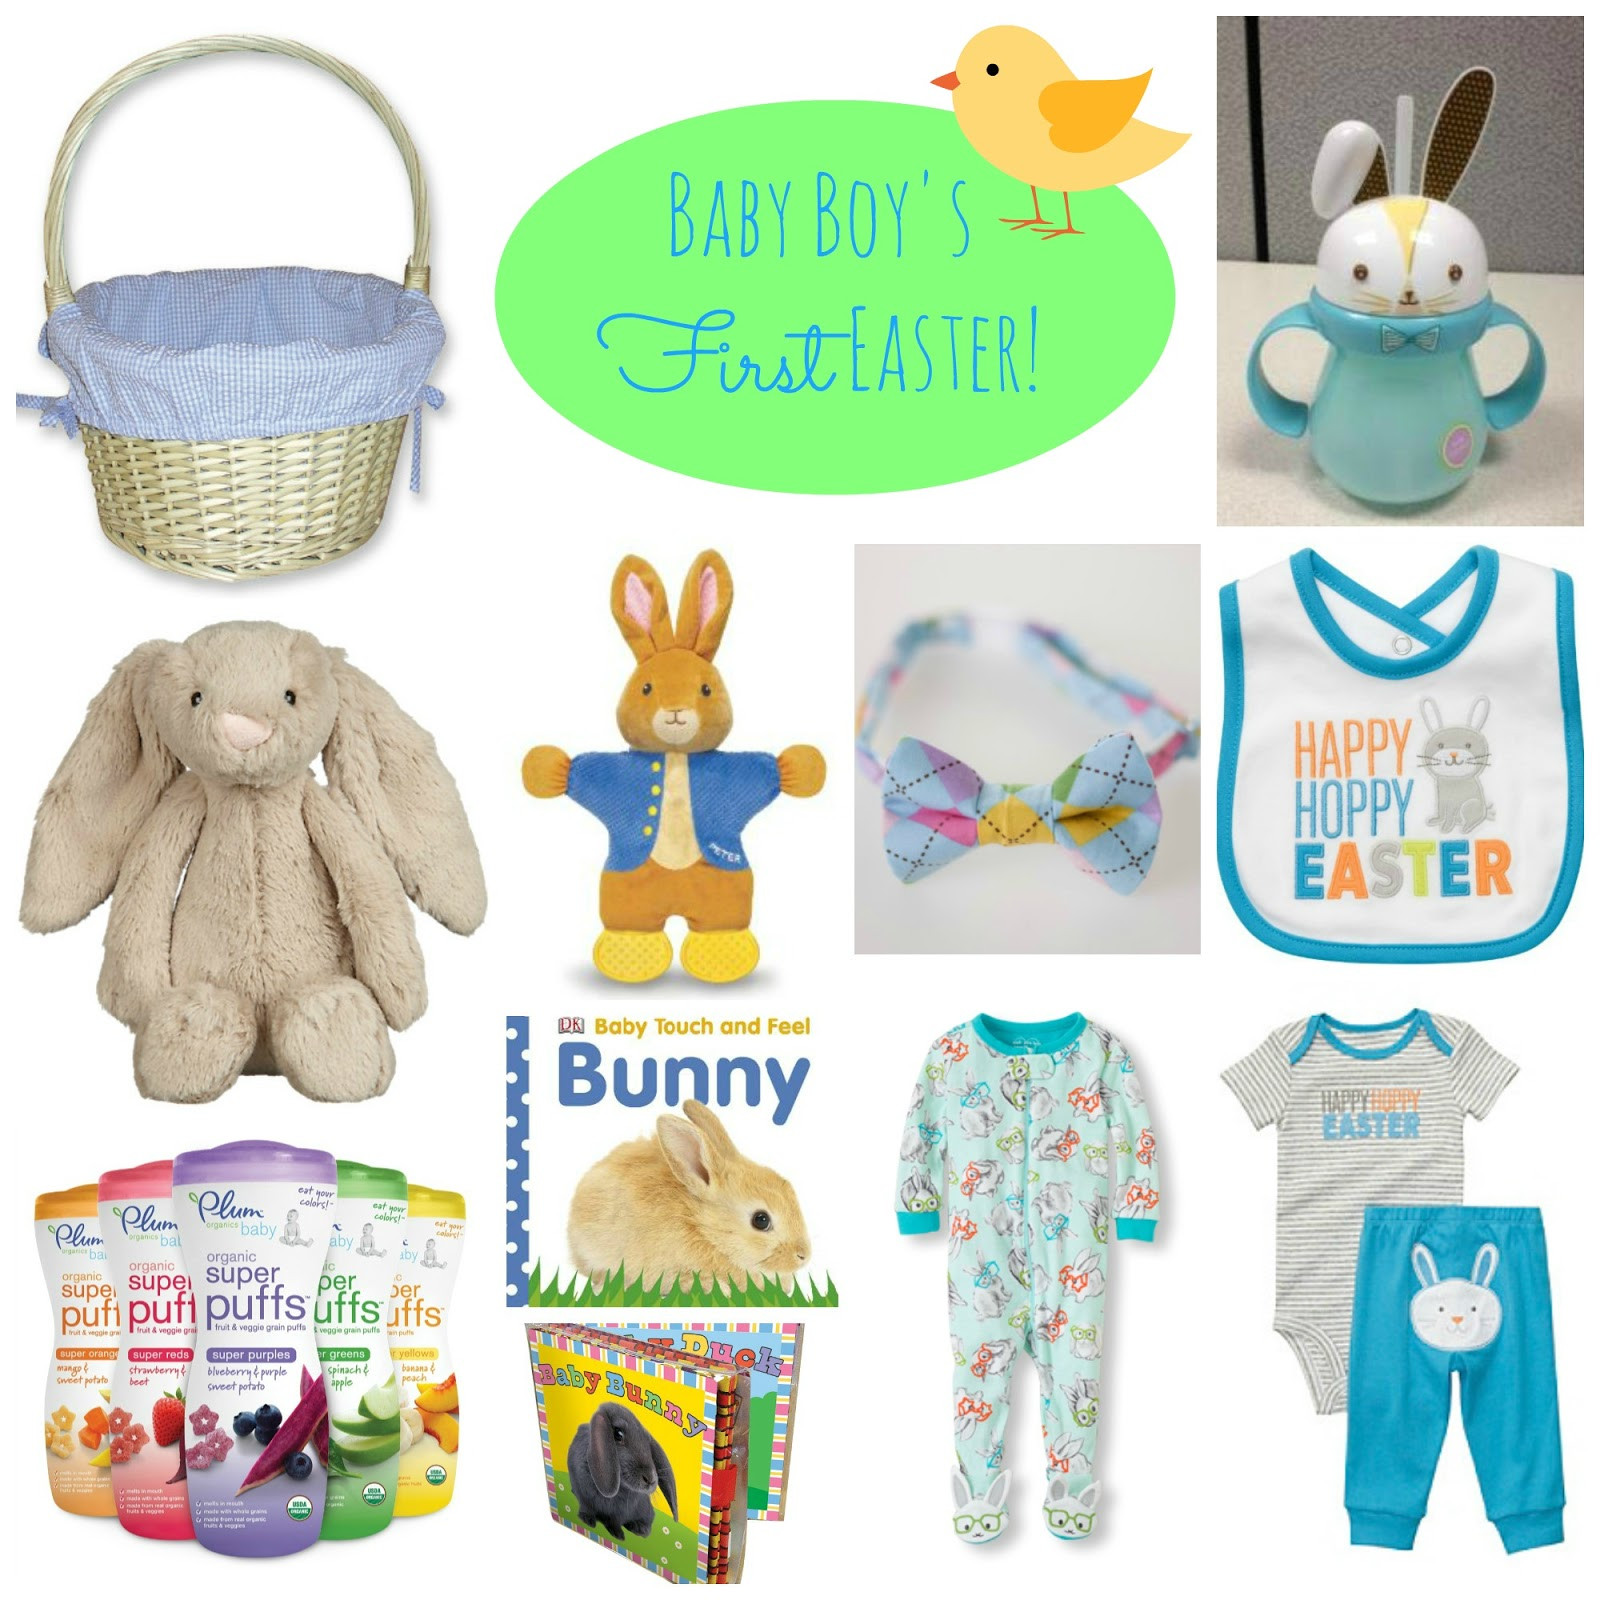 Boy Easter Basket Ideas
 Simple Suburbia Baby s First Easter Basket Ideas